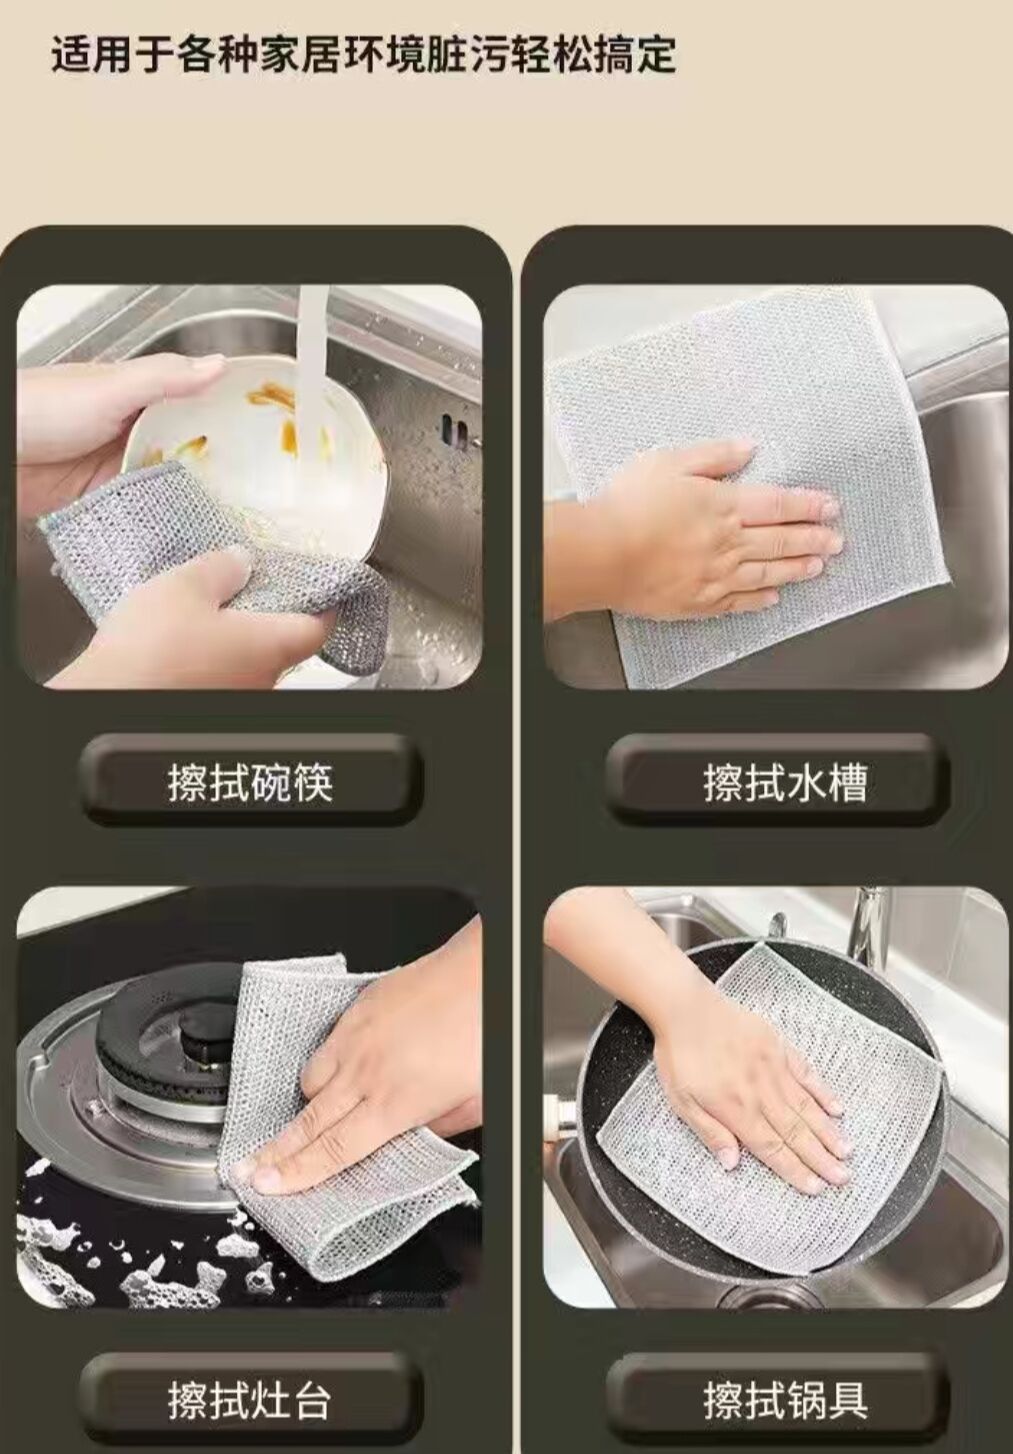 Steel Wire Rag New Dishcloth Double-Layer Encryption Oil Removal Strong Decontamination Environmental Protection Polyester Material Household Kitchen Cleaning